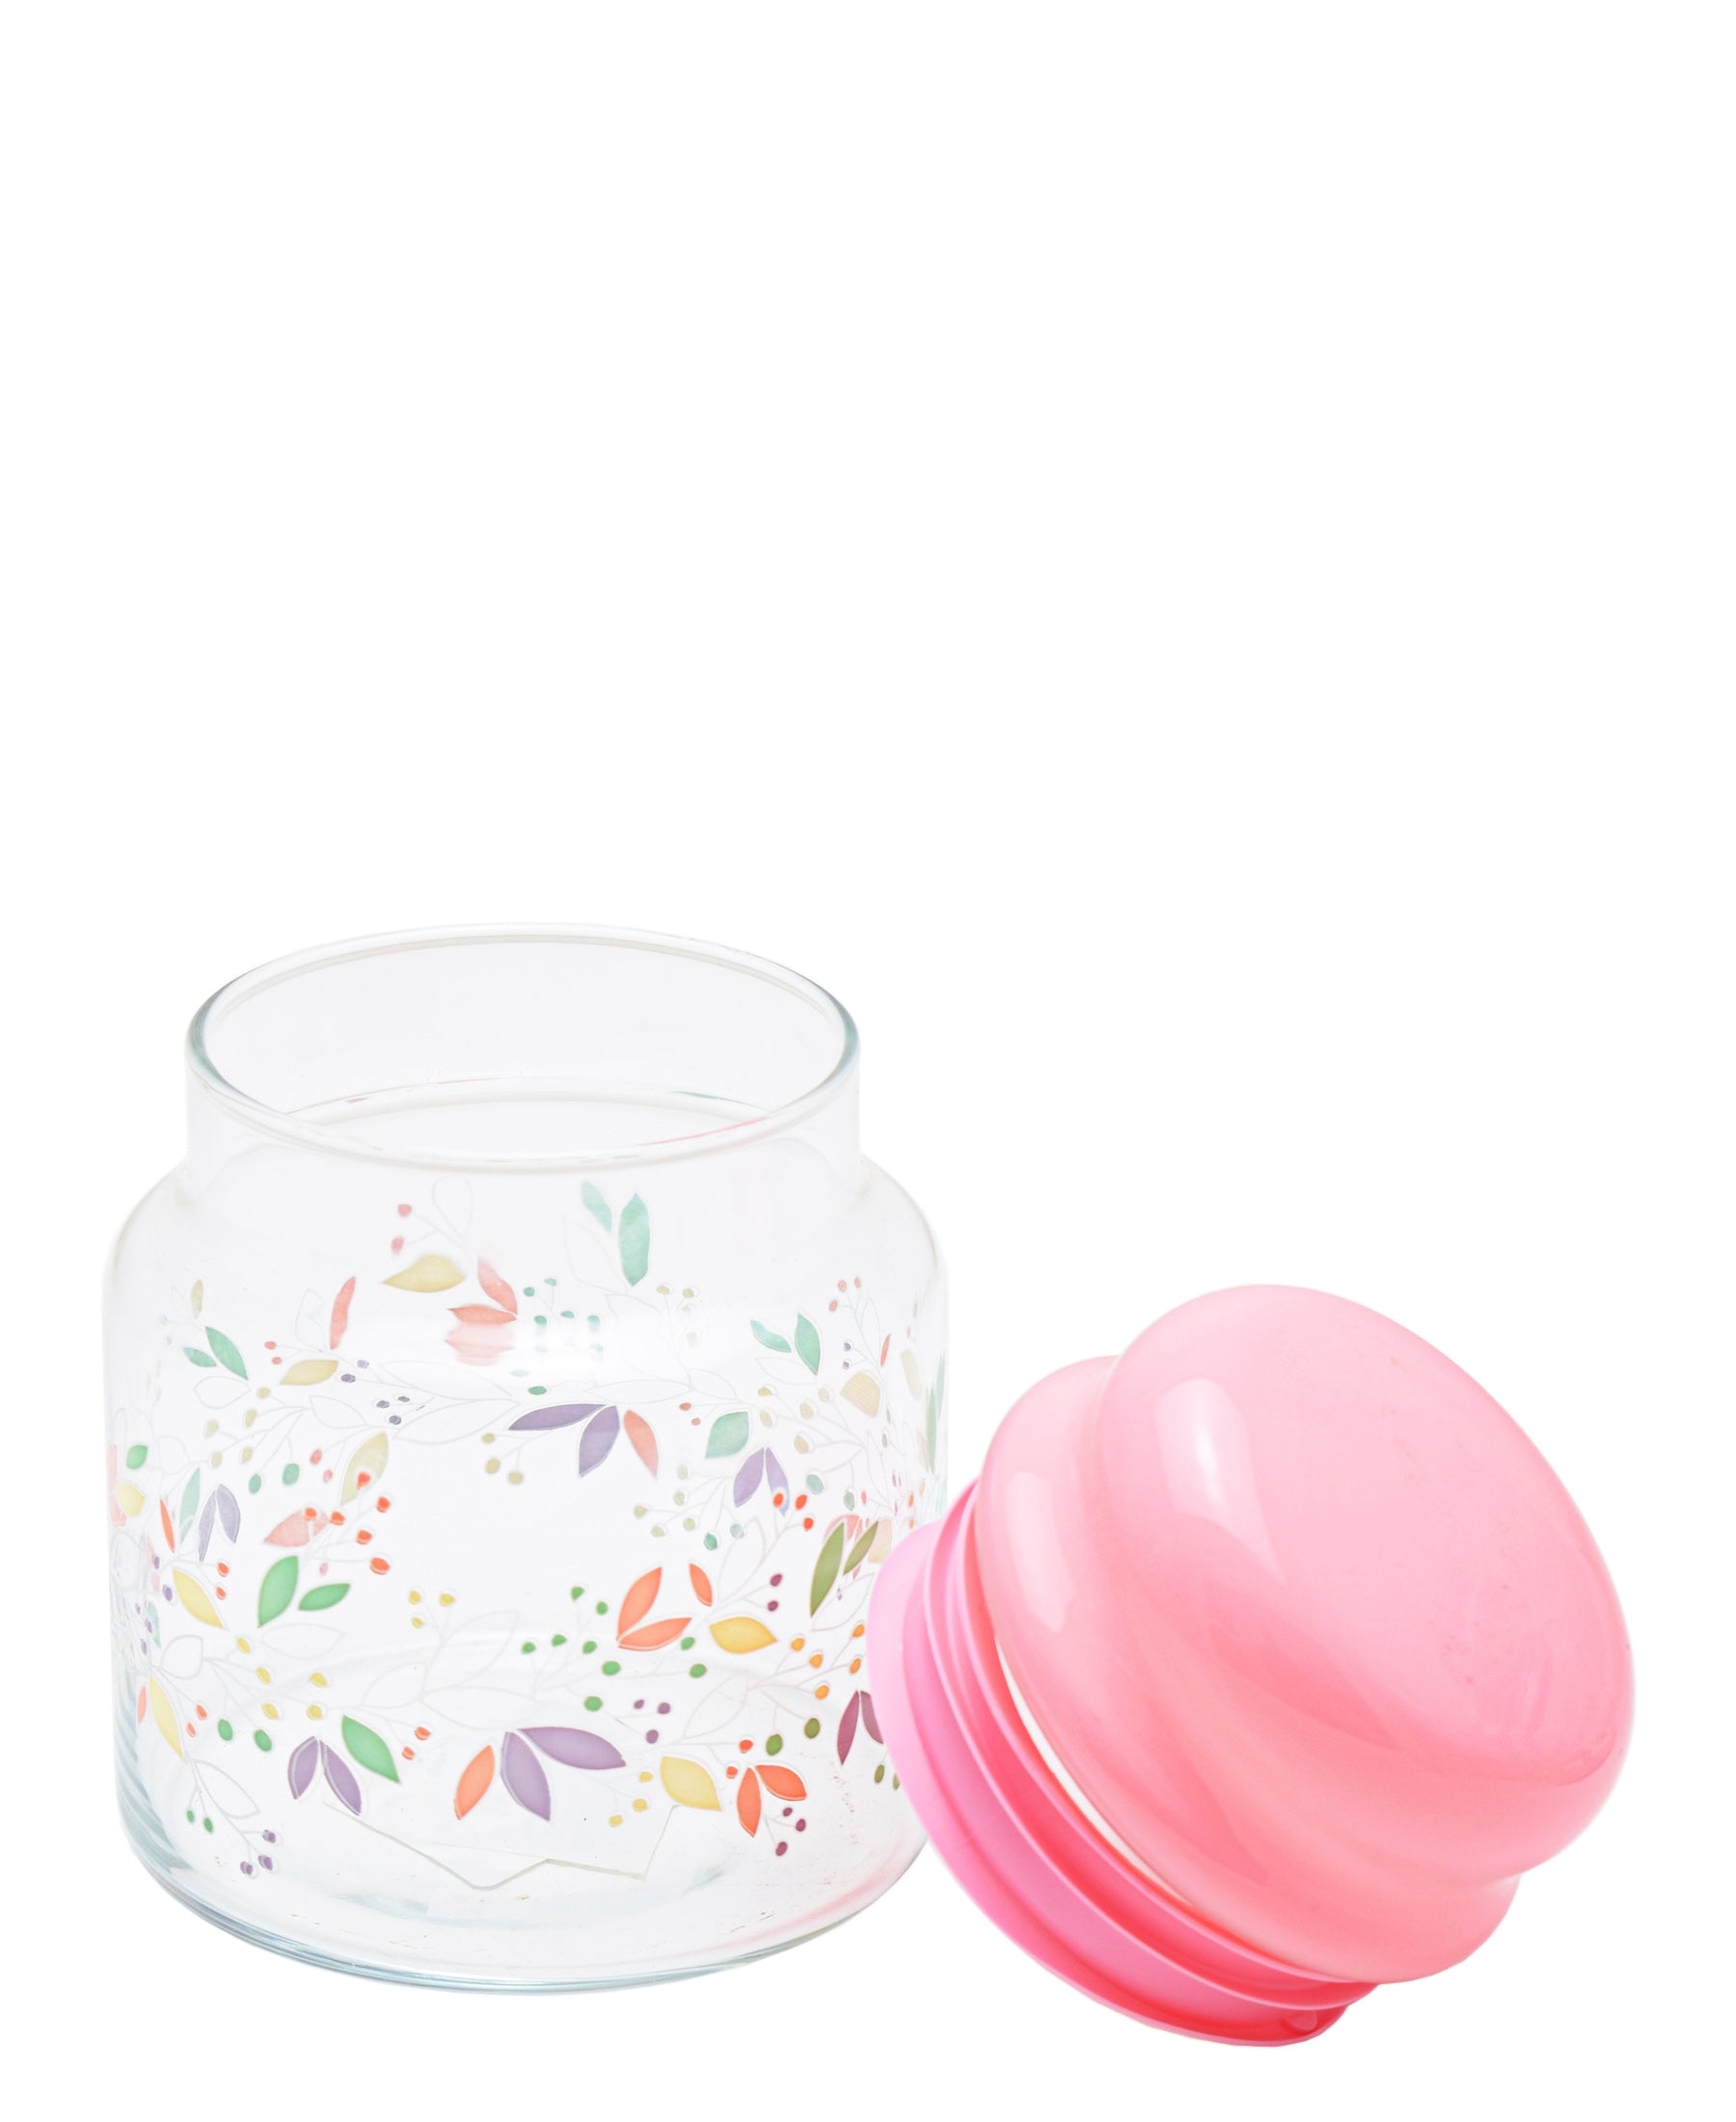 LAV 635ml Glass Jar With Lid - Pink